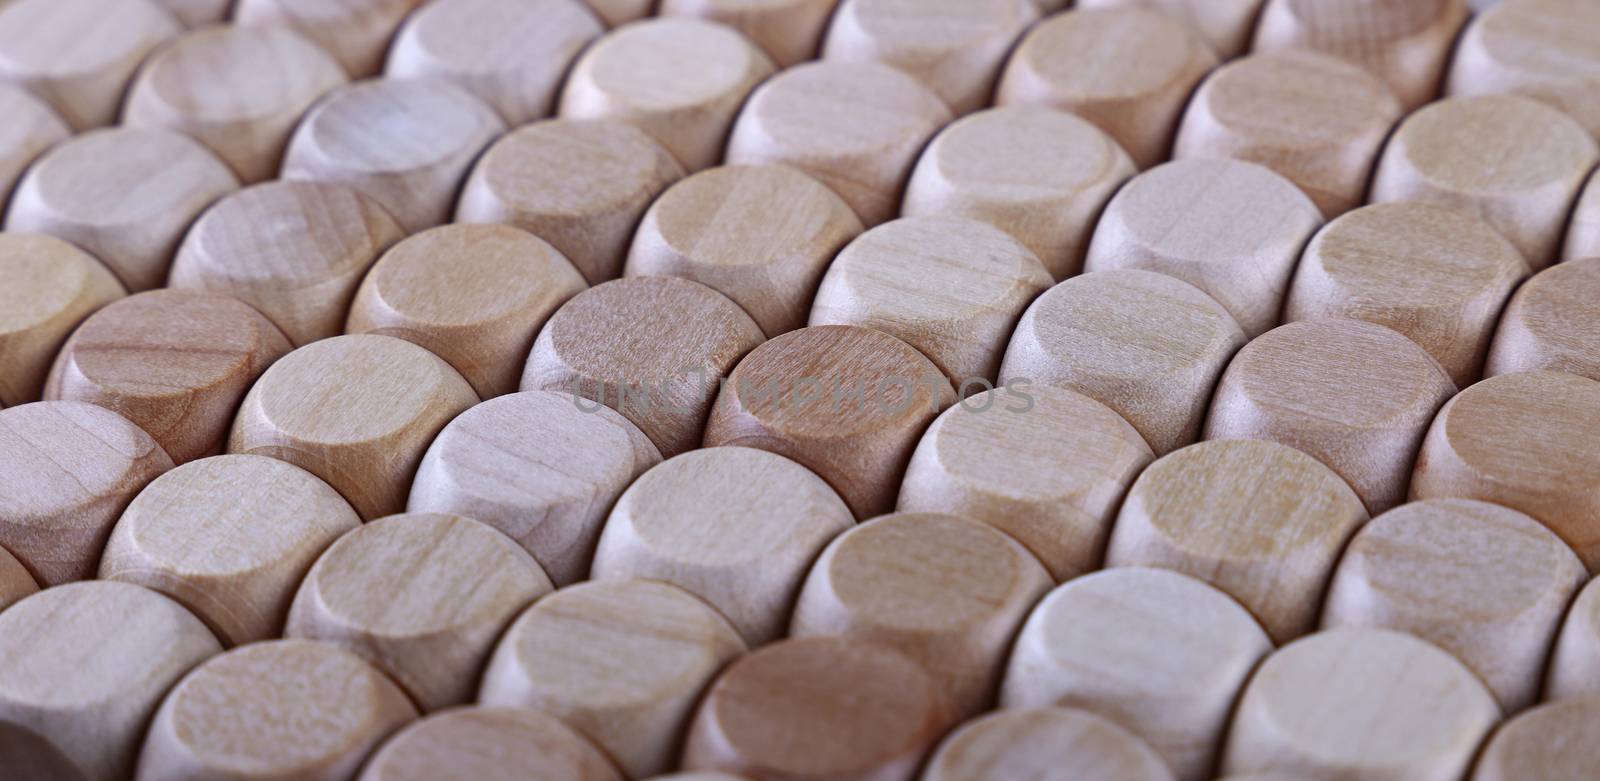 Close up background pattern of natural wooden dice shaped toy building blocks, high angle view perspective